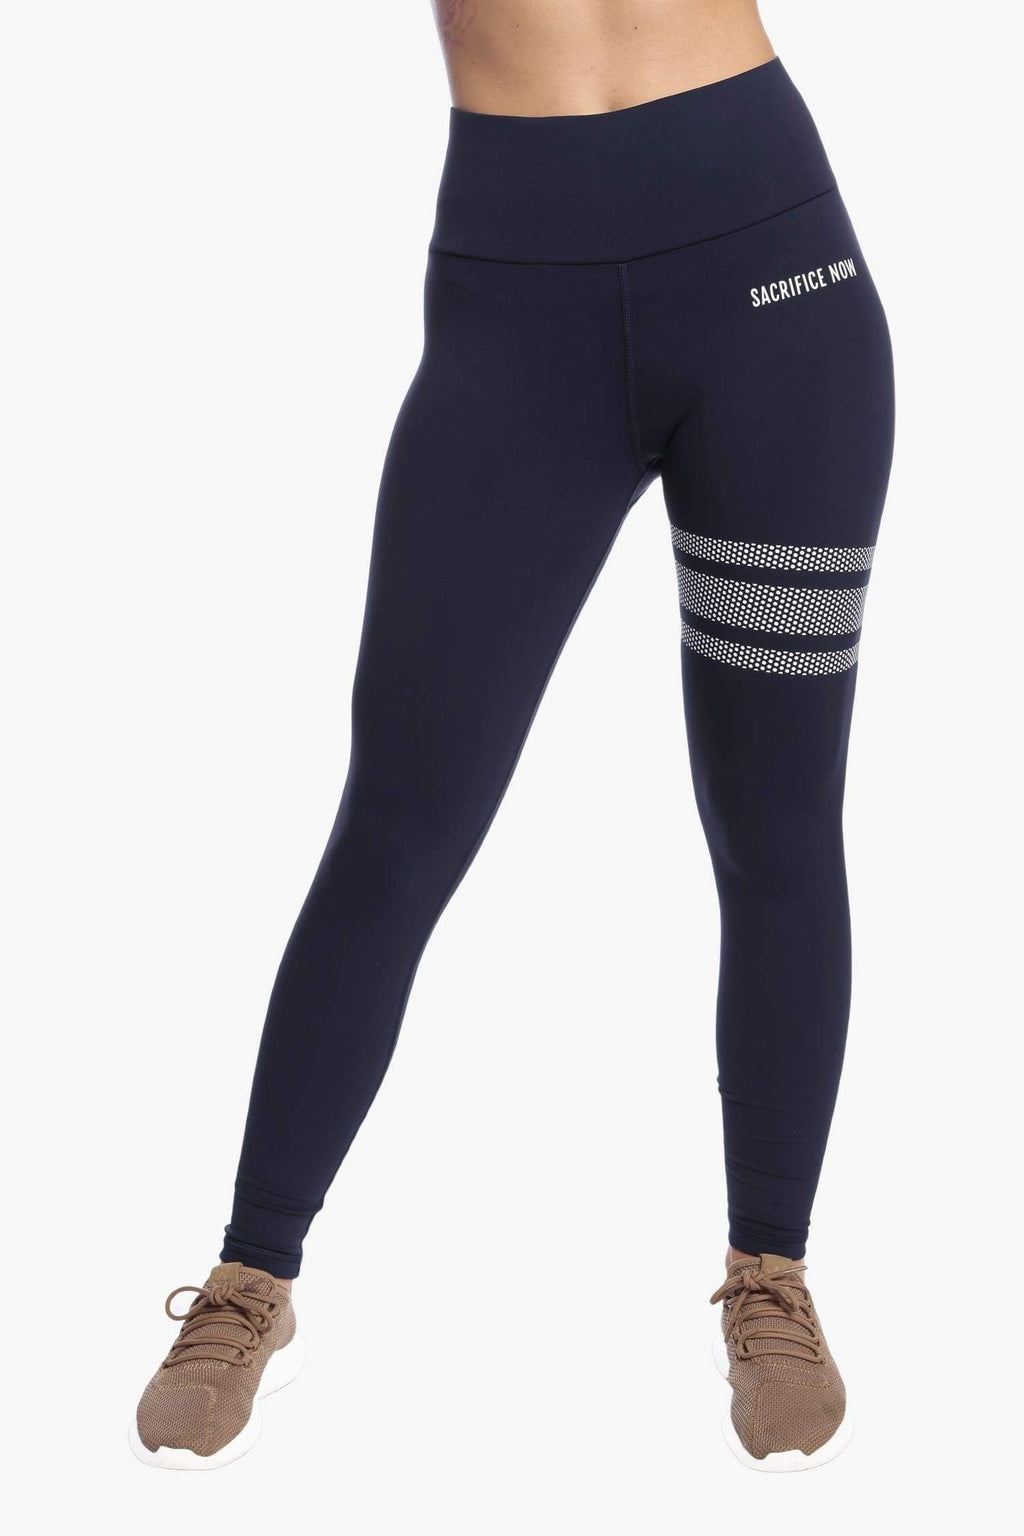 VEKDONE Discount - Low To High Yoga Pants Women Lightning Deals of Today  Prime Clearance 